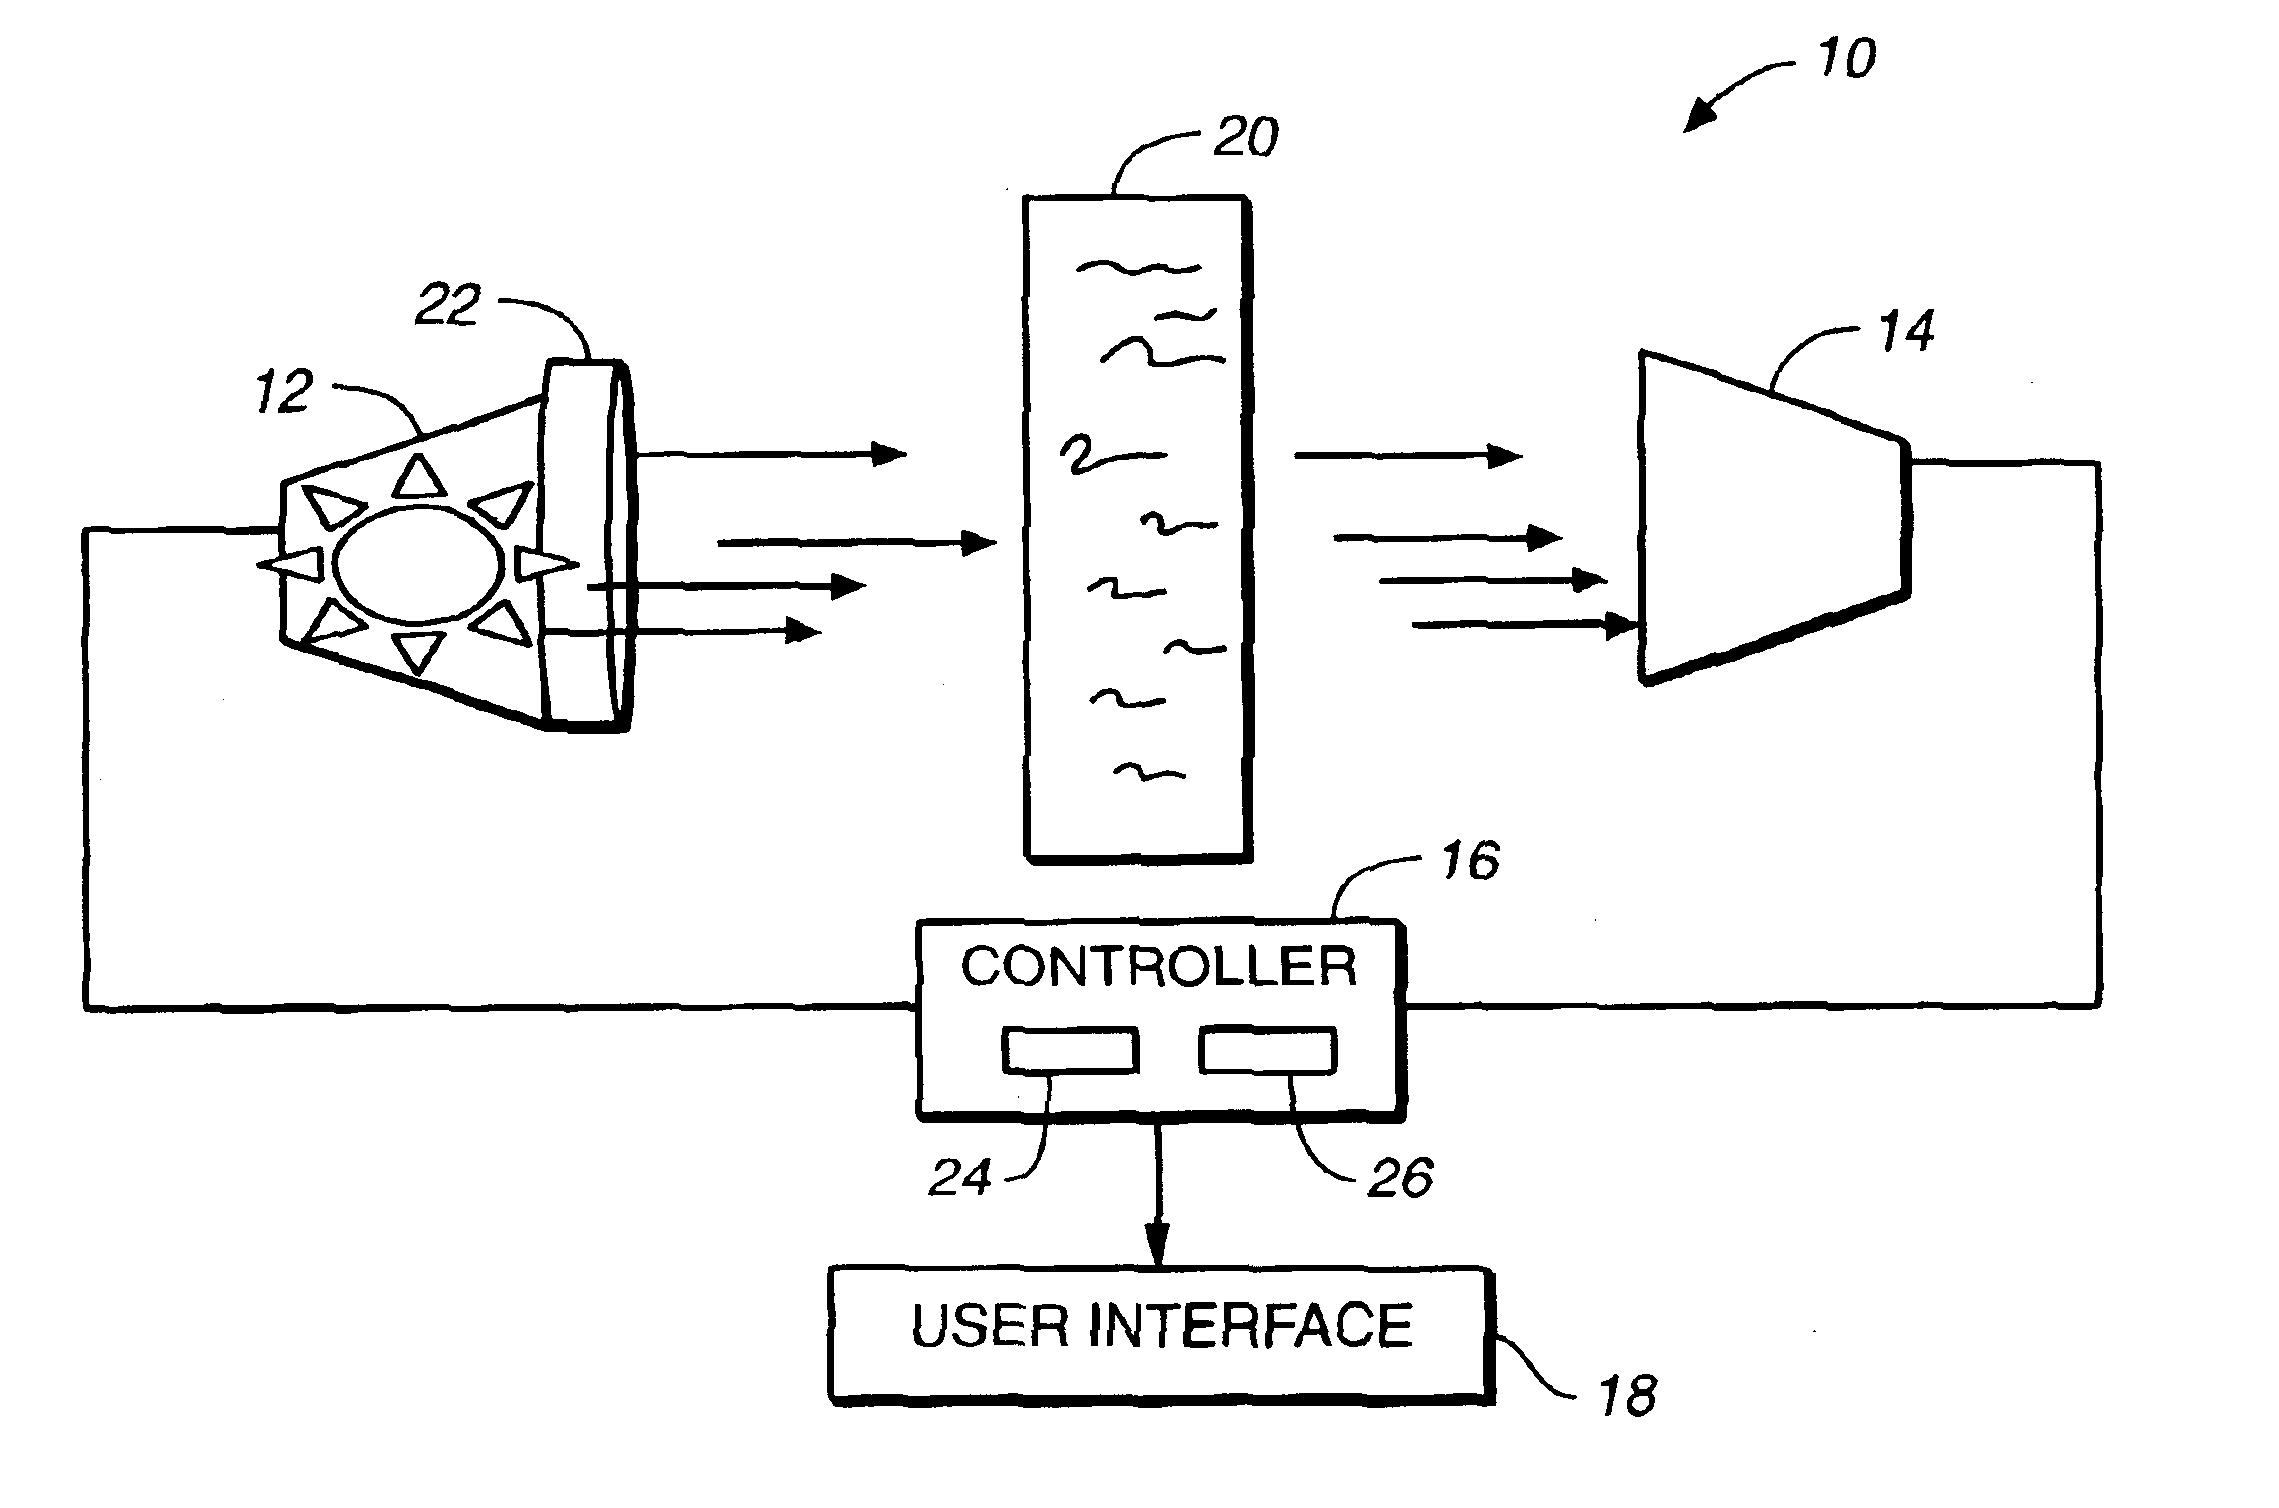 Method and apparatus for monitoring the condition of a lubricating medium